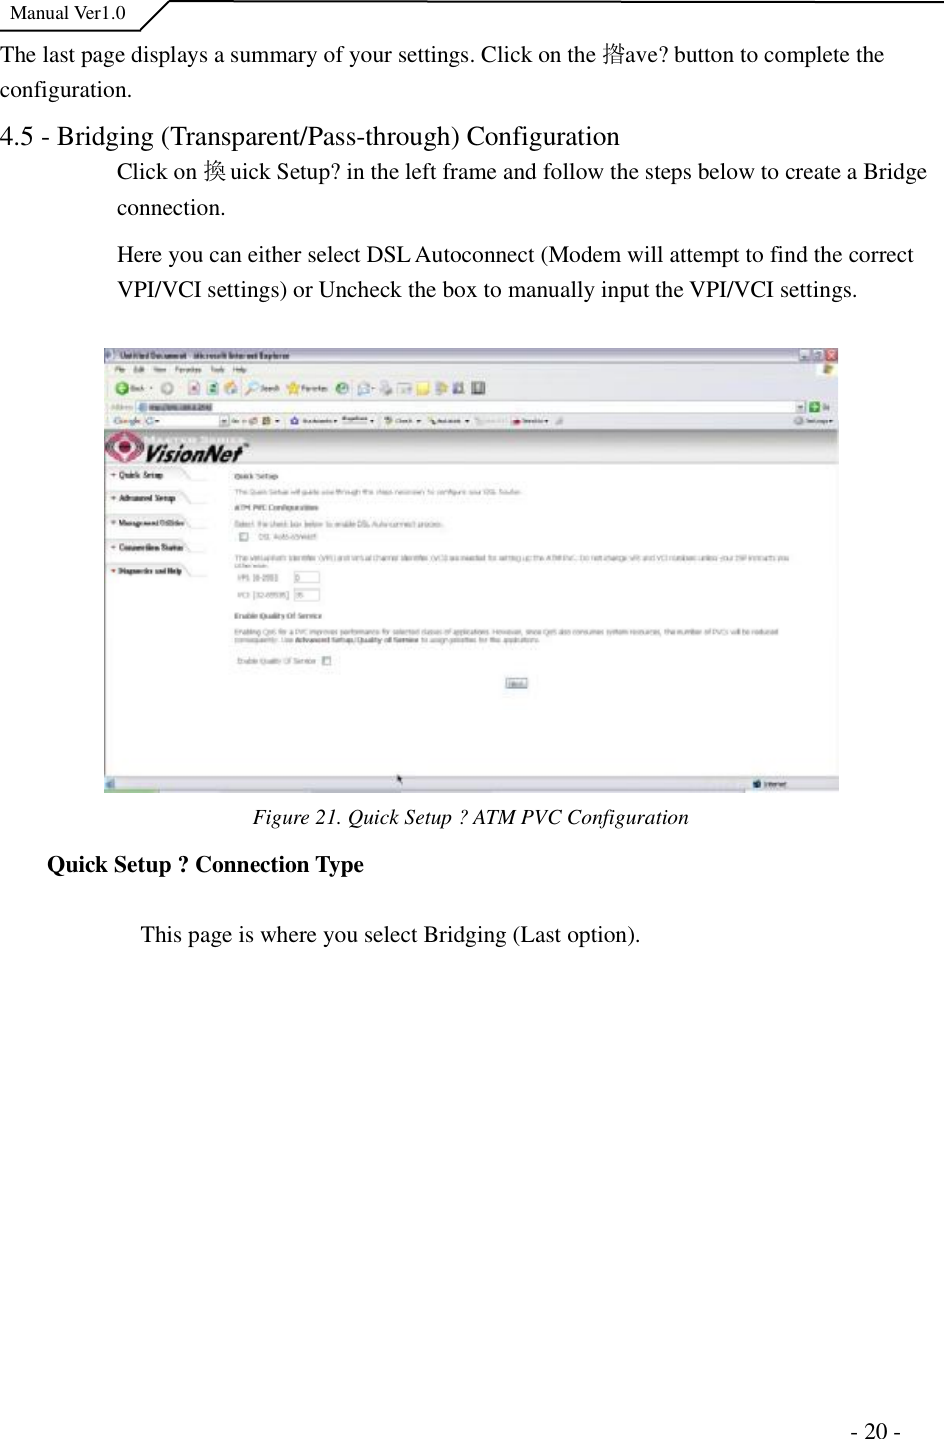  Manual Ver1.0 The last page displays a summary of your settings. Click on the 揝ave?button to complete the configuration.4.5 - Bridging (Transparent/Pass-through) Configuration Click on 換uick Setup?in the left frame and follow the steps below to create a Bridge connection.Here you can either select DSL Autoconnect (Modem will attempt to find the correct VPI/VCI settings) or Uncheck the box to manually input the VPI/VCI settings.  Figure 21. Quick Setup ?ATM PVC Configuration  Quick Setup ?Connection Type This page is where you select Bridging (Last option).                                                                      - 20 - 